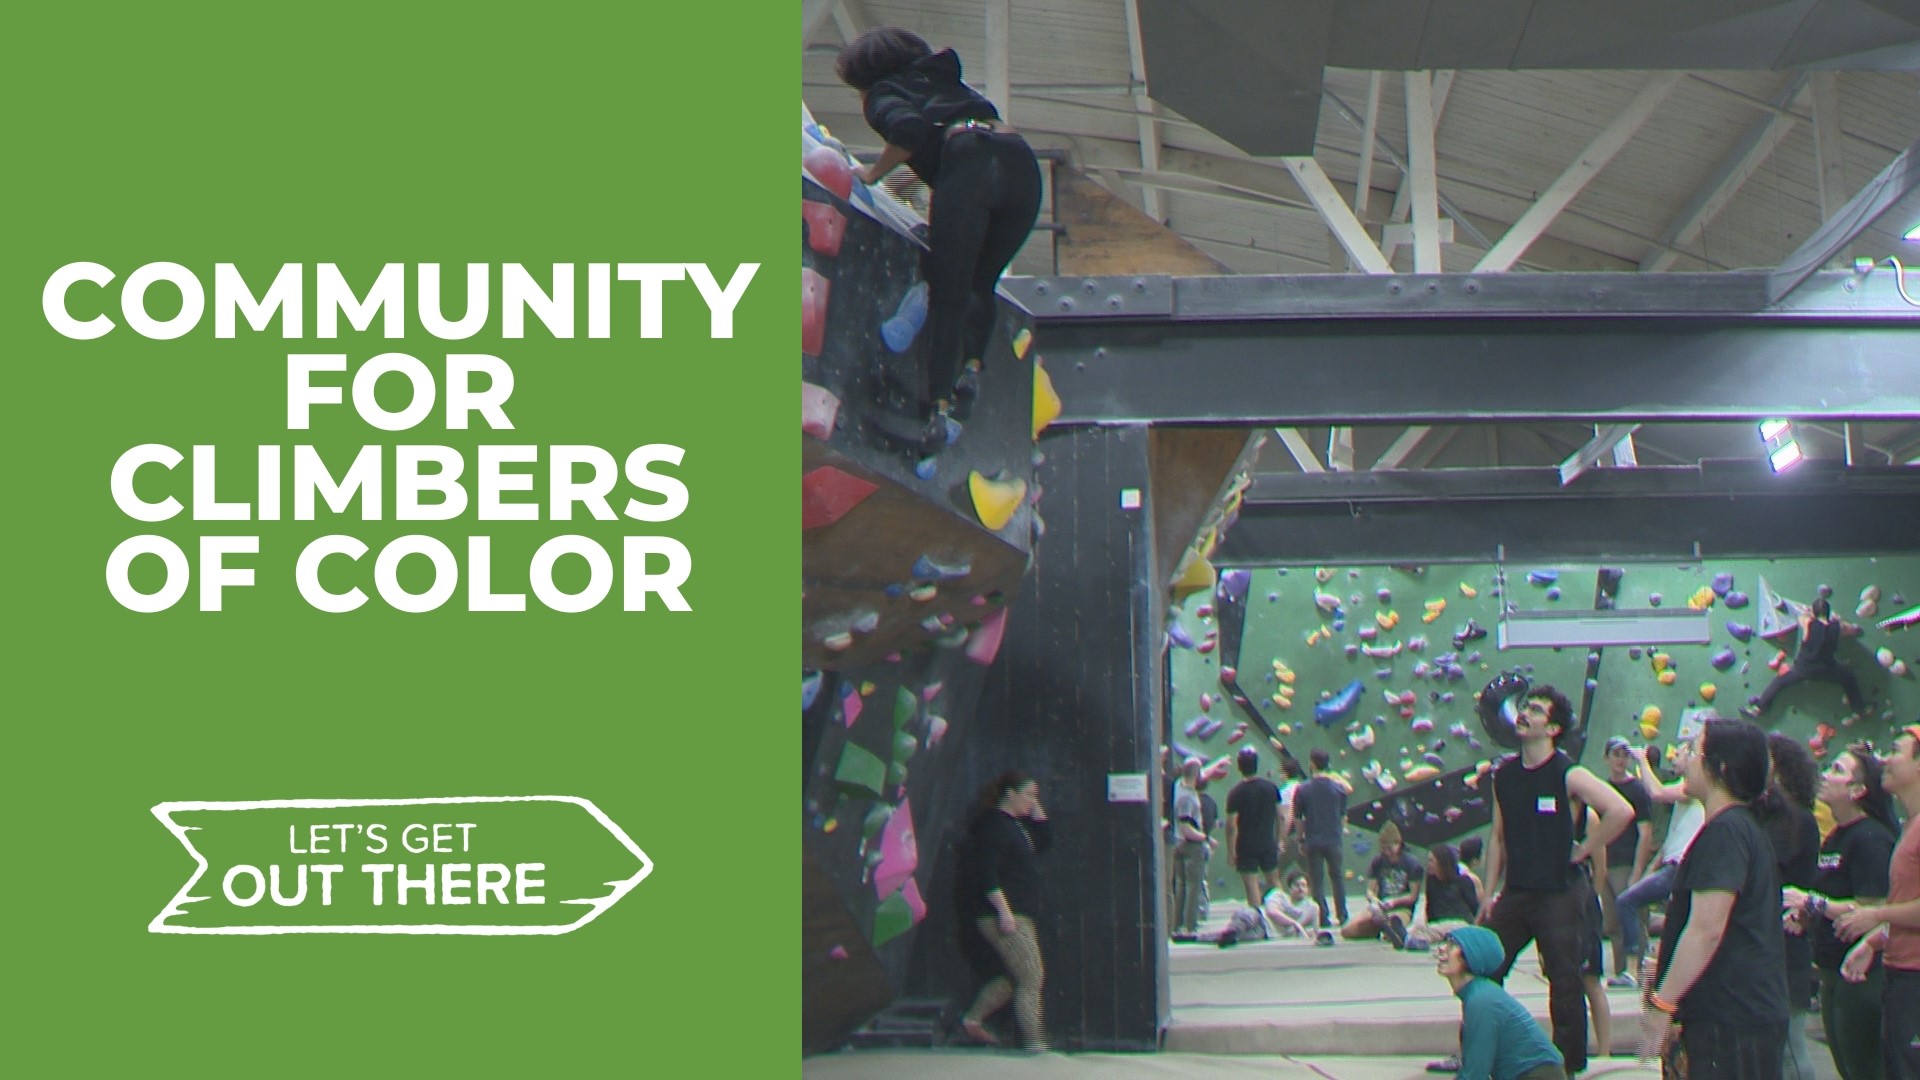 PDX Climbers of Color offers an indoor space for those who want to get into the sport. The group has around 1,600 members on Facebook.